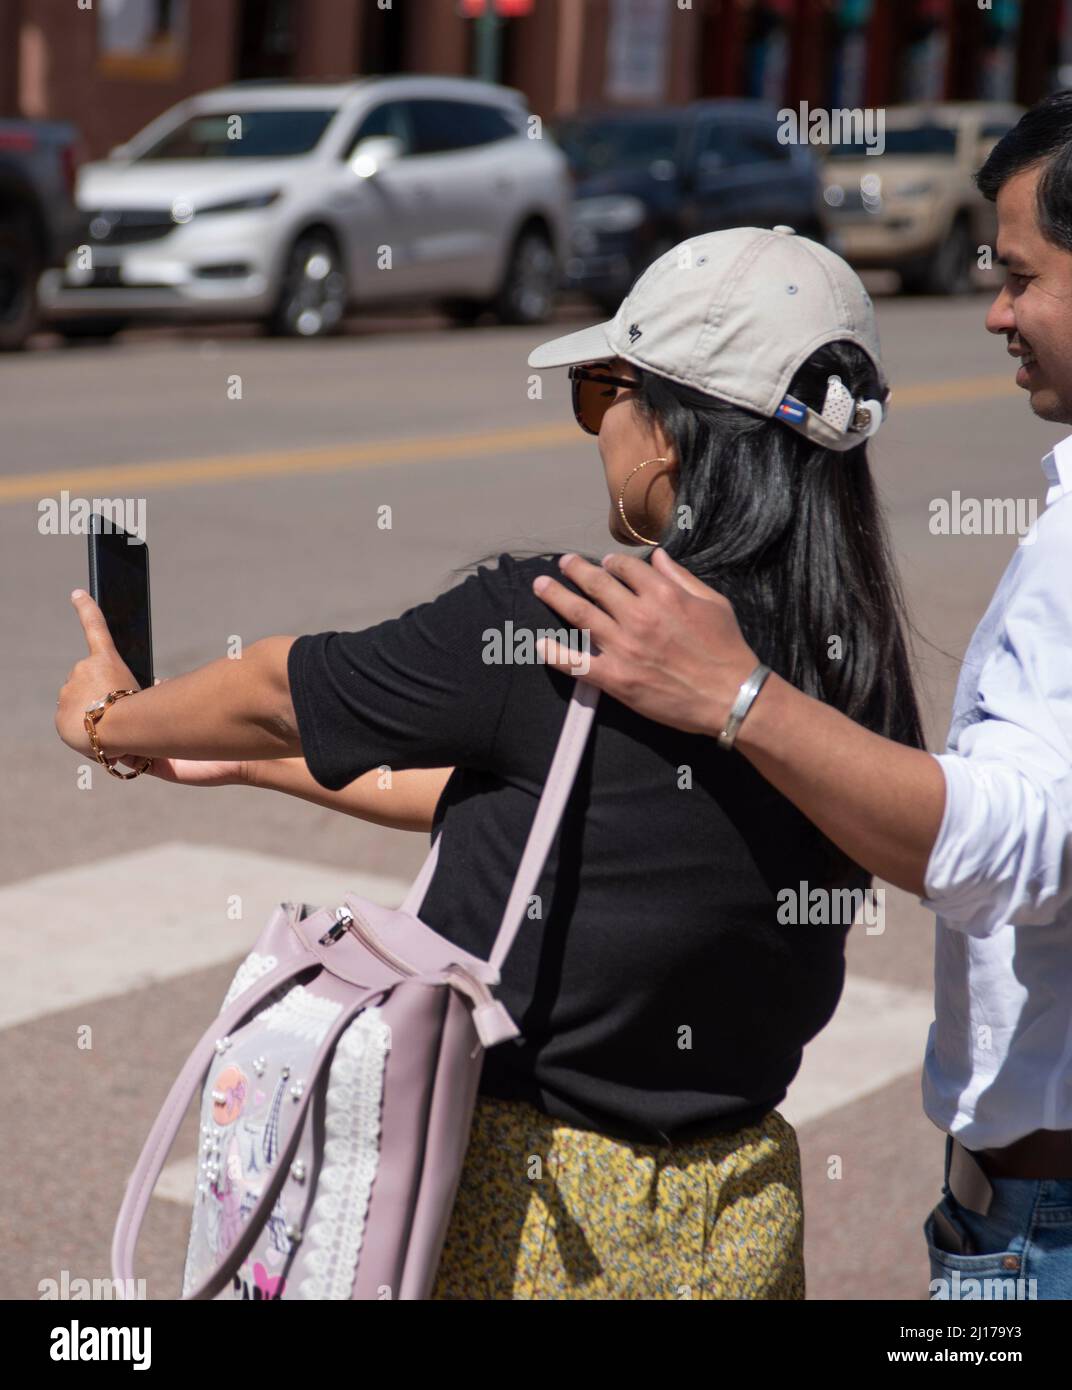 A couple visiting Santa Fe, New Mexico, take a souvenir selfie portrait with their smartphone. Stock Photo